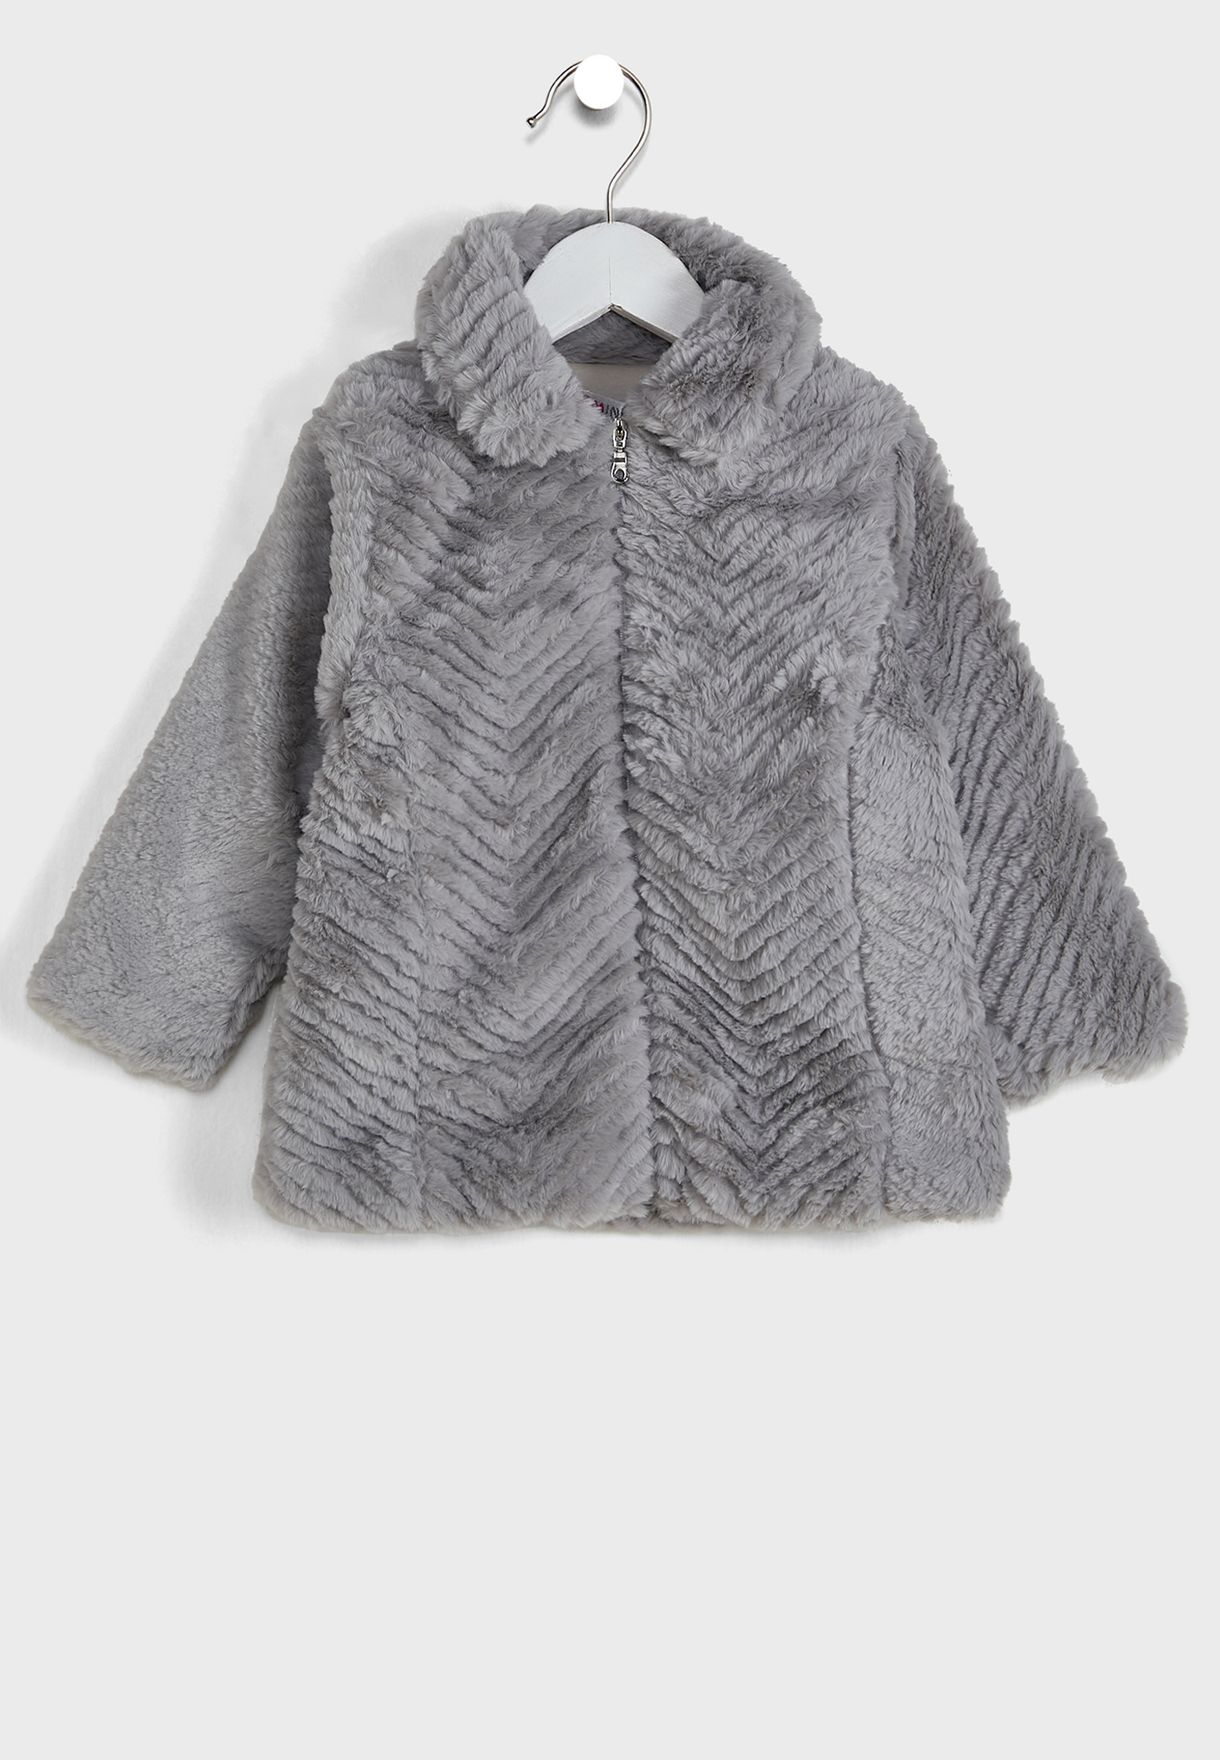 Infant Quilted Jacket